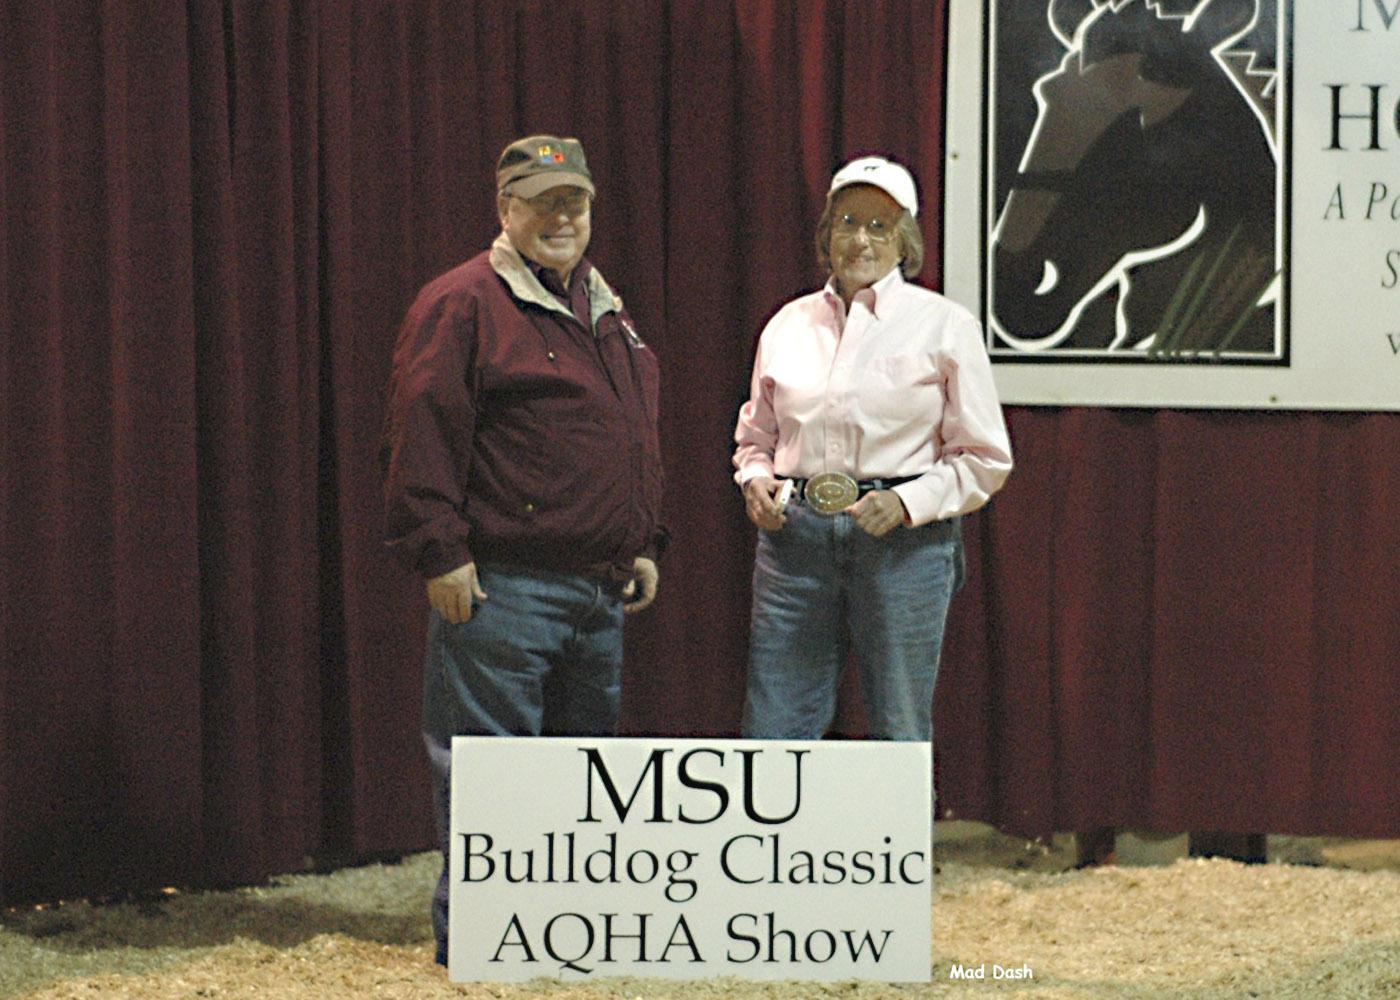 Mary Hopkins, right, played an instrumental role in starting the Bulldog Classic AQHA show in the early 1960s. She visits with Terry Kiser, animal and dairy sciences department head at Mississippi State University, at the Mississippi Horse Park in Starkville where the oldest quarter horse show in Mississippi is held. (Photo by Mad Dash Photography)